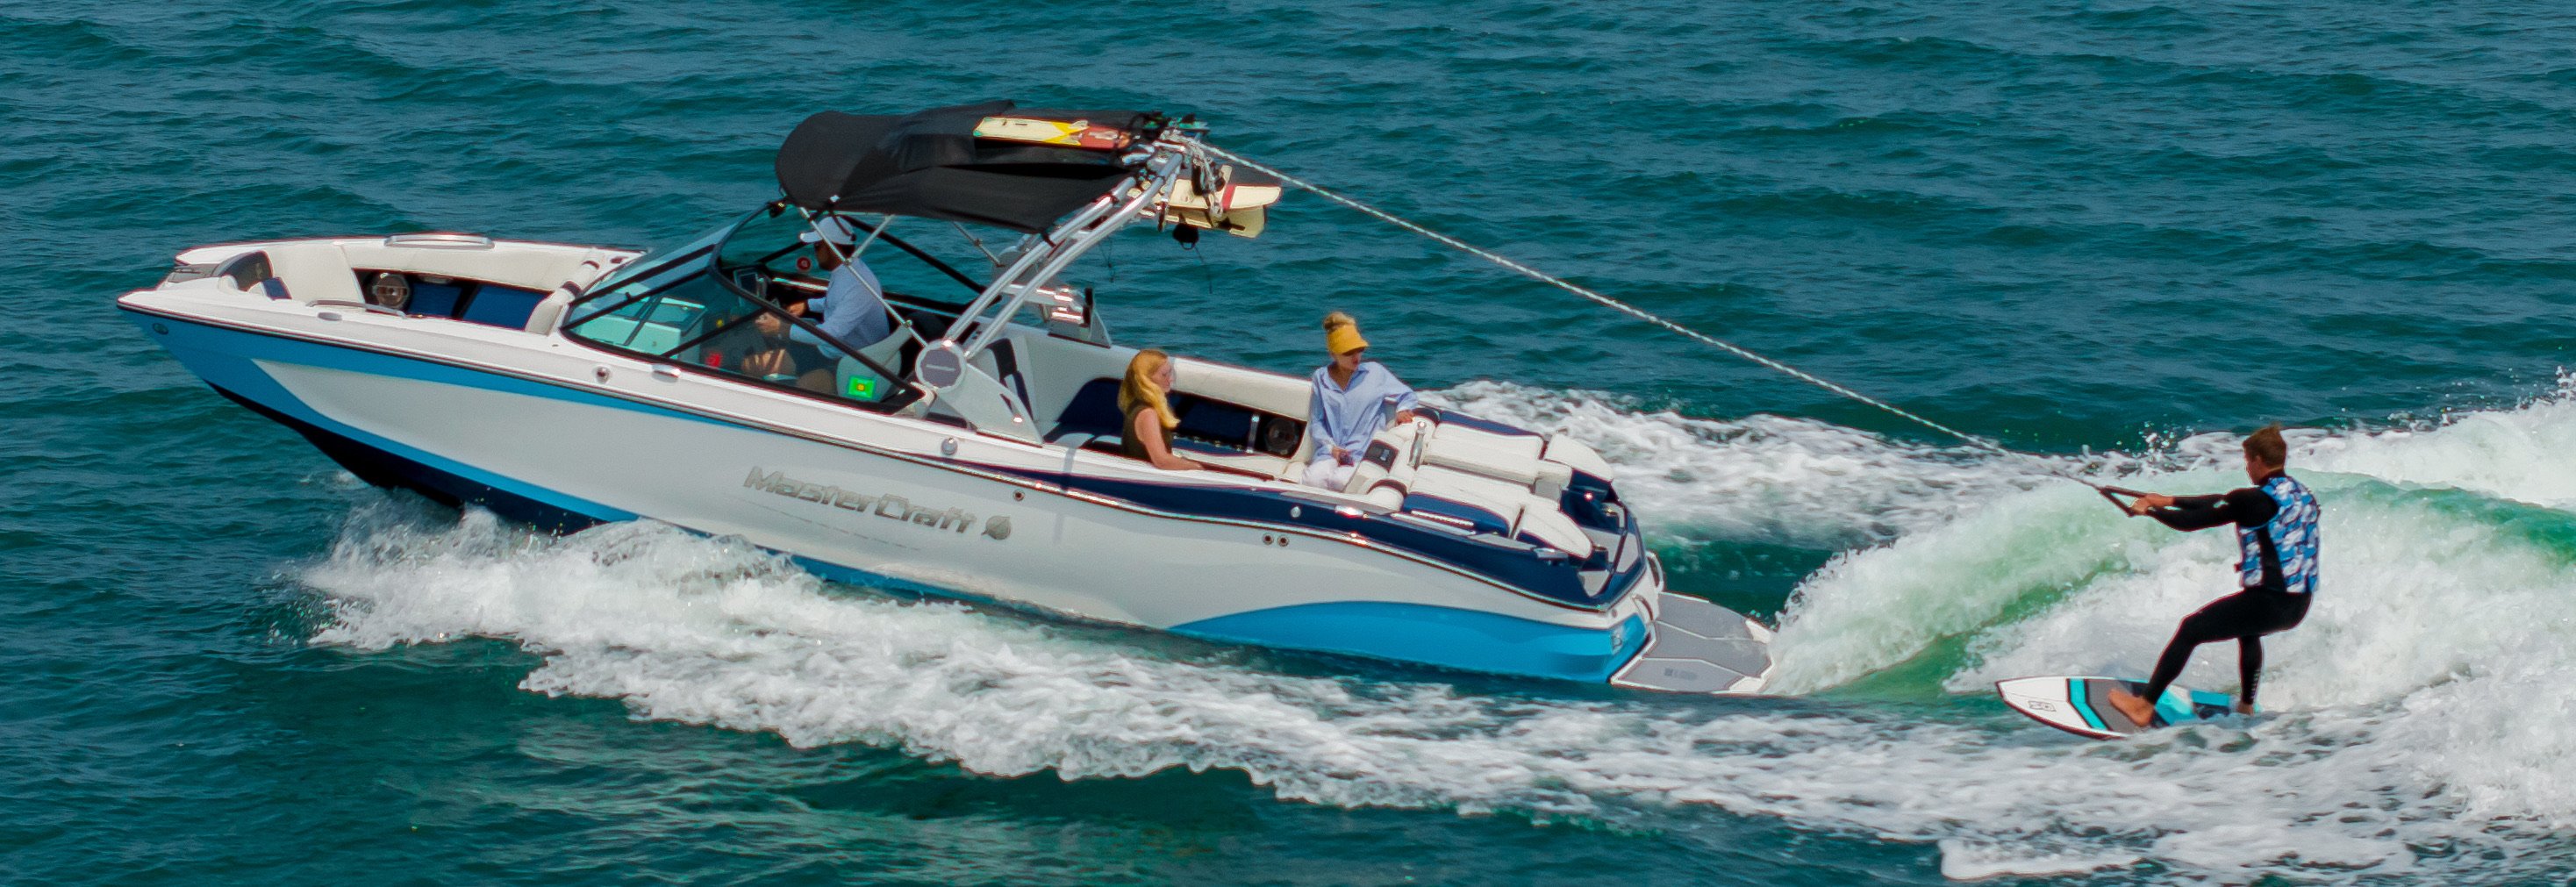 62' Pershing + Seabobs and 26' Mastercraft Tie-Up (25 Guests)